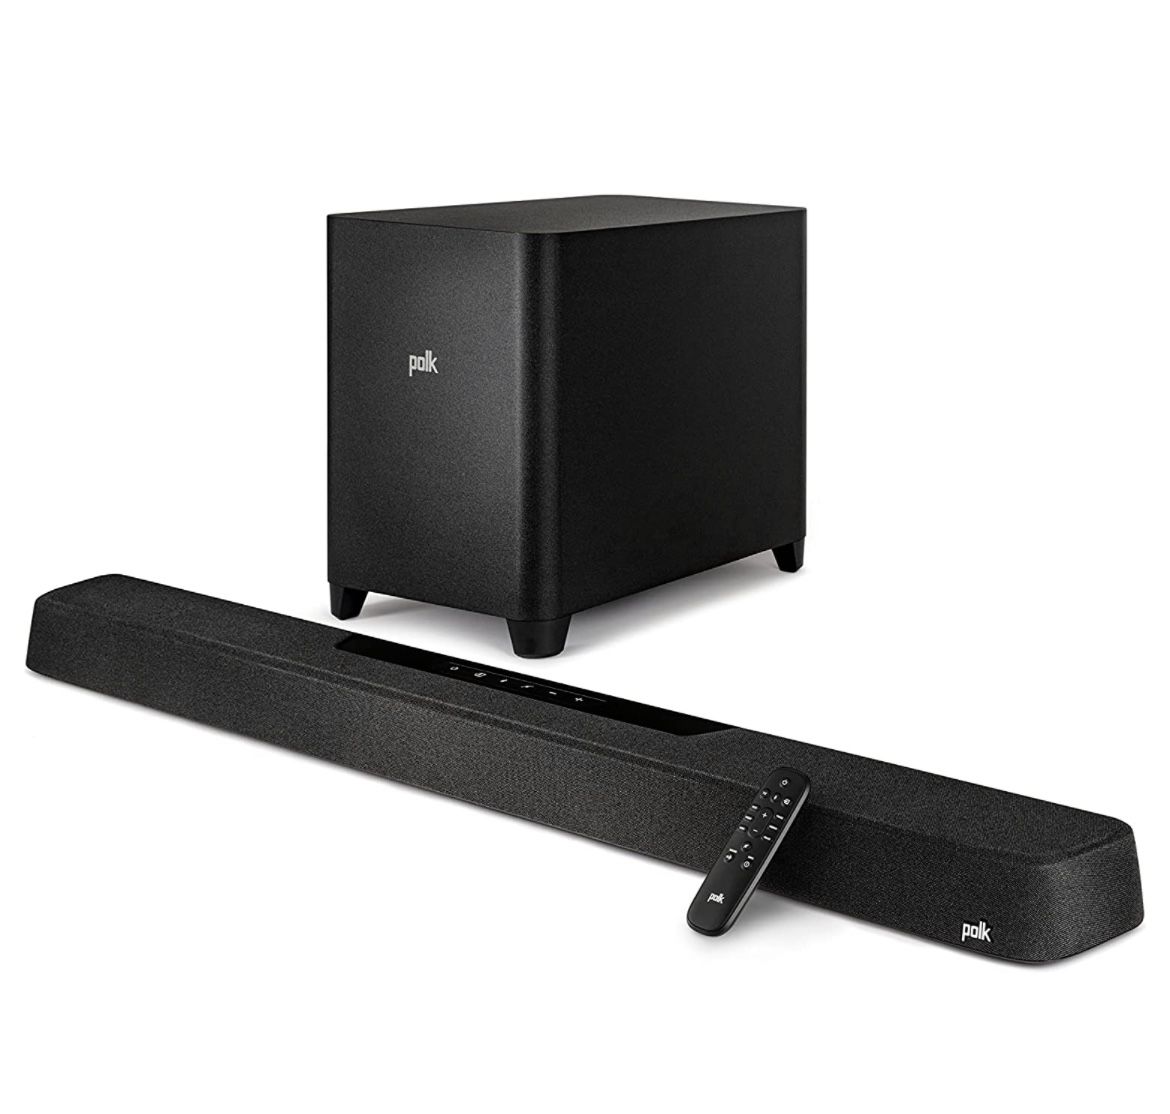 Polk MagniFi Max AX 5.1.2 Channel Sound Bar with 10" Wireless Subwoofer #3351